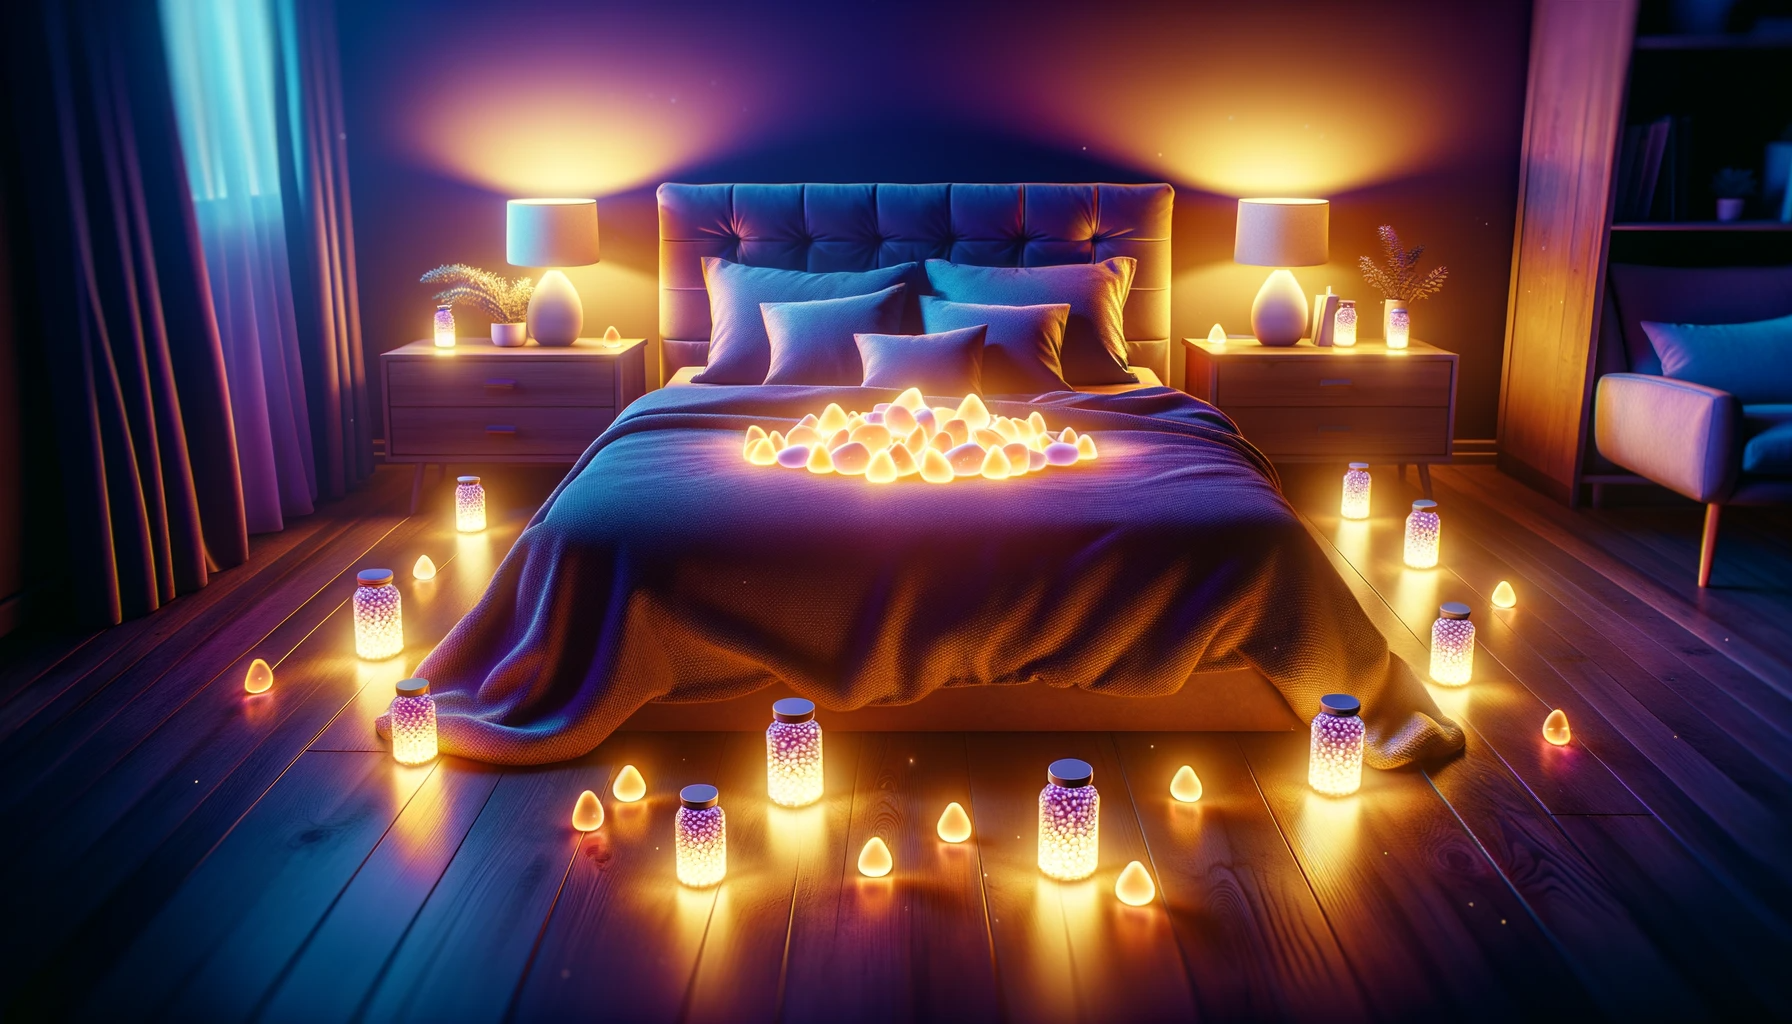 A brilliantly lit bedroom at night with glowing sleep gummies surrounding the bed.